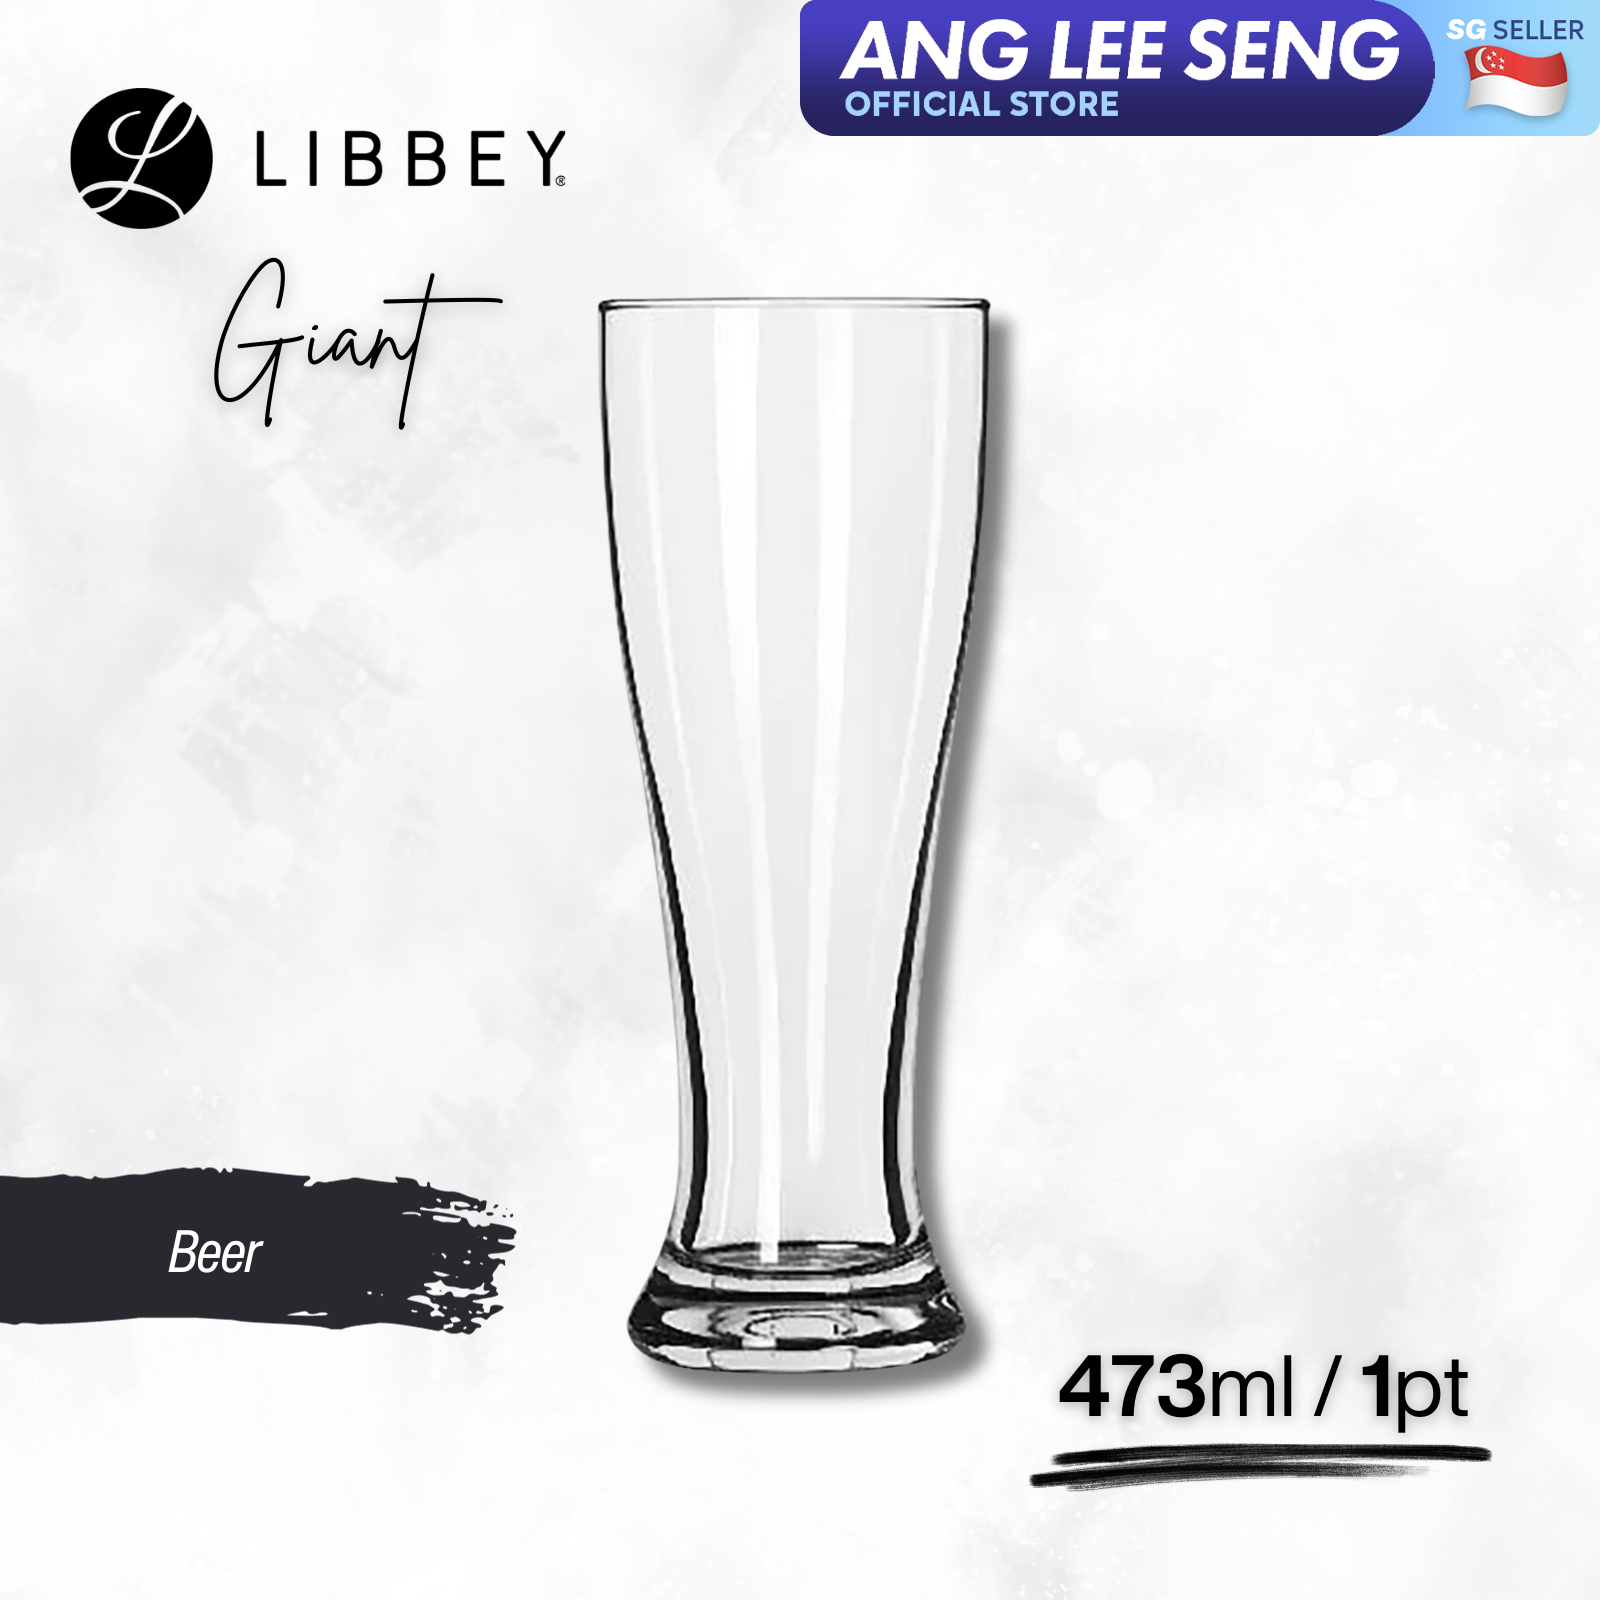 Libbey Giant 1604 Beer Pint Glass 473ml/1pt